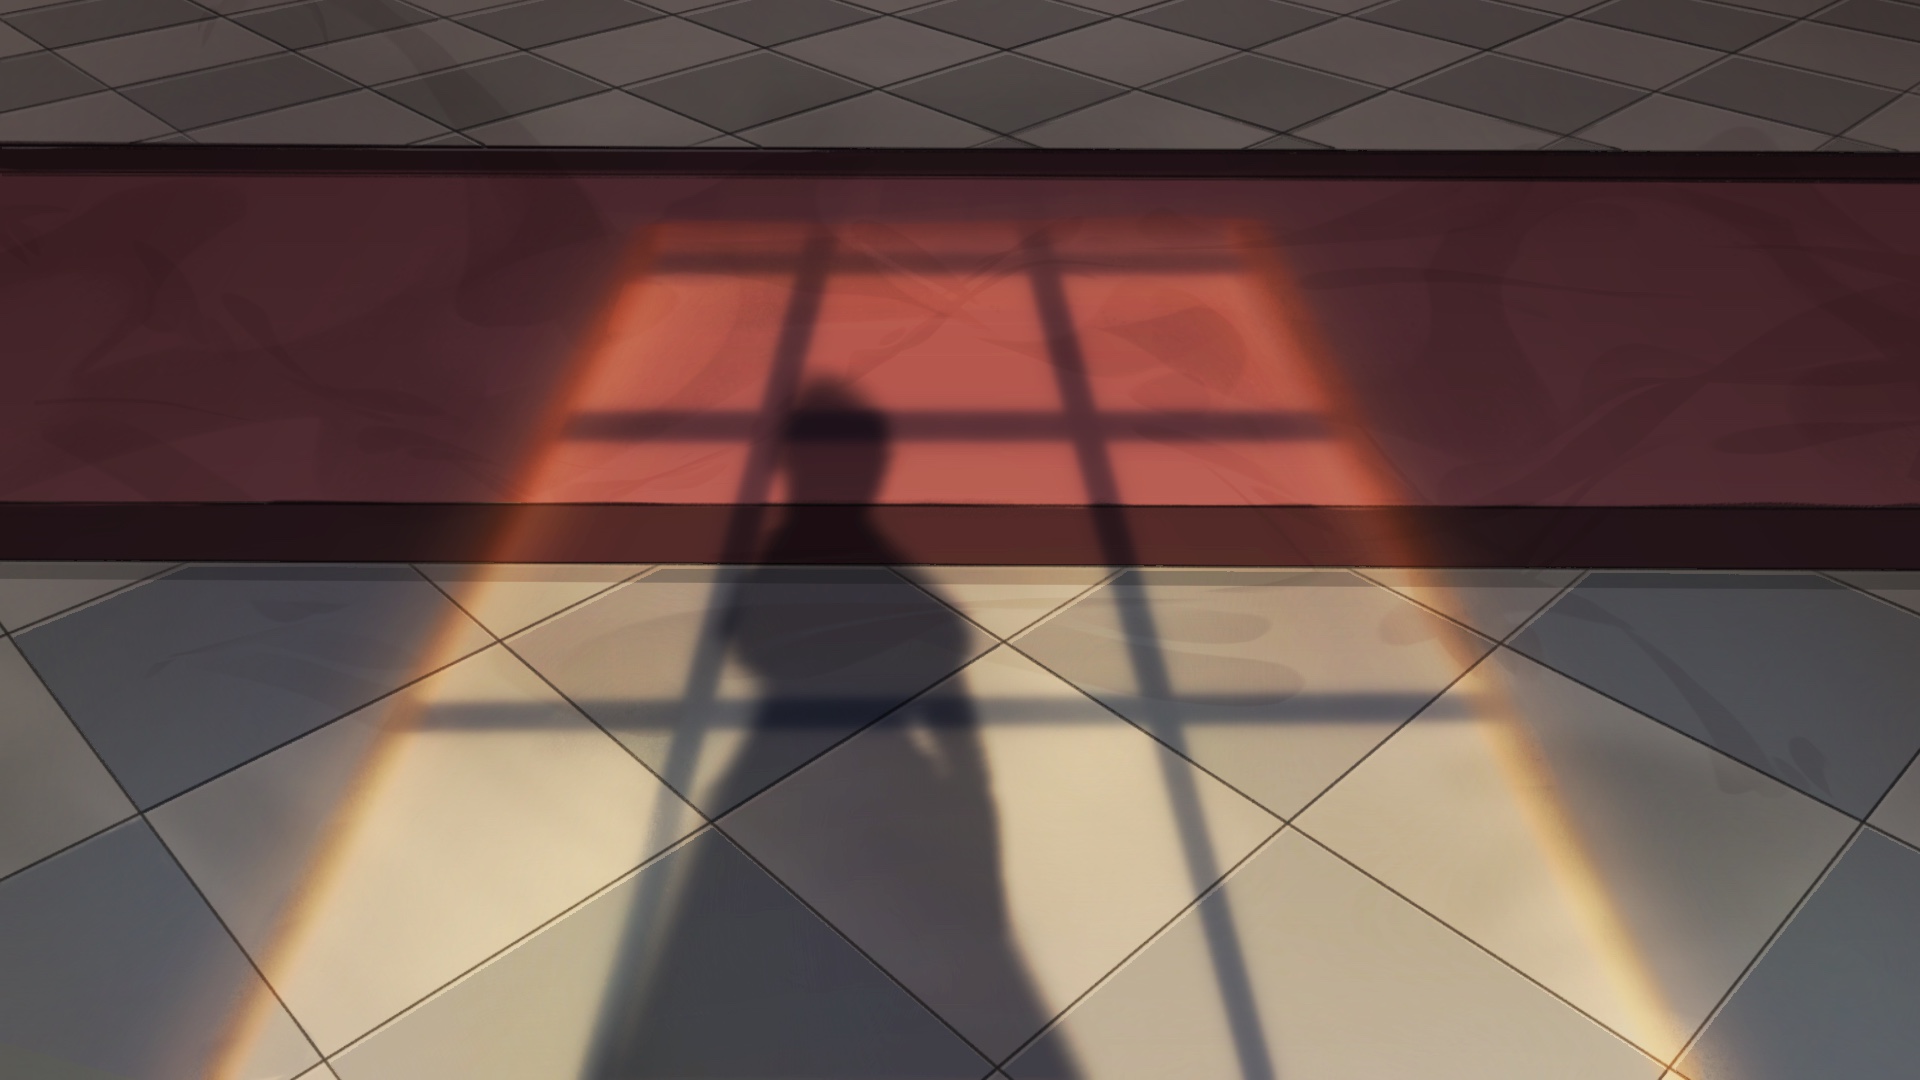 Illustration of woman's shadow cast on tiled floor